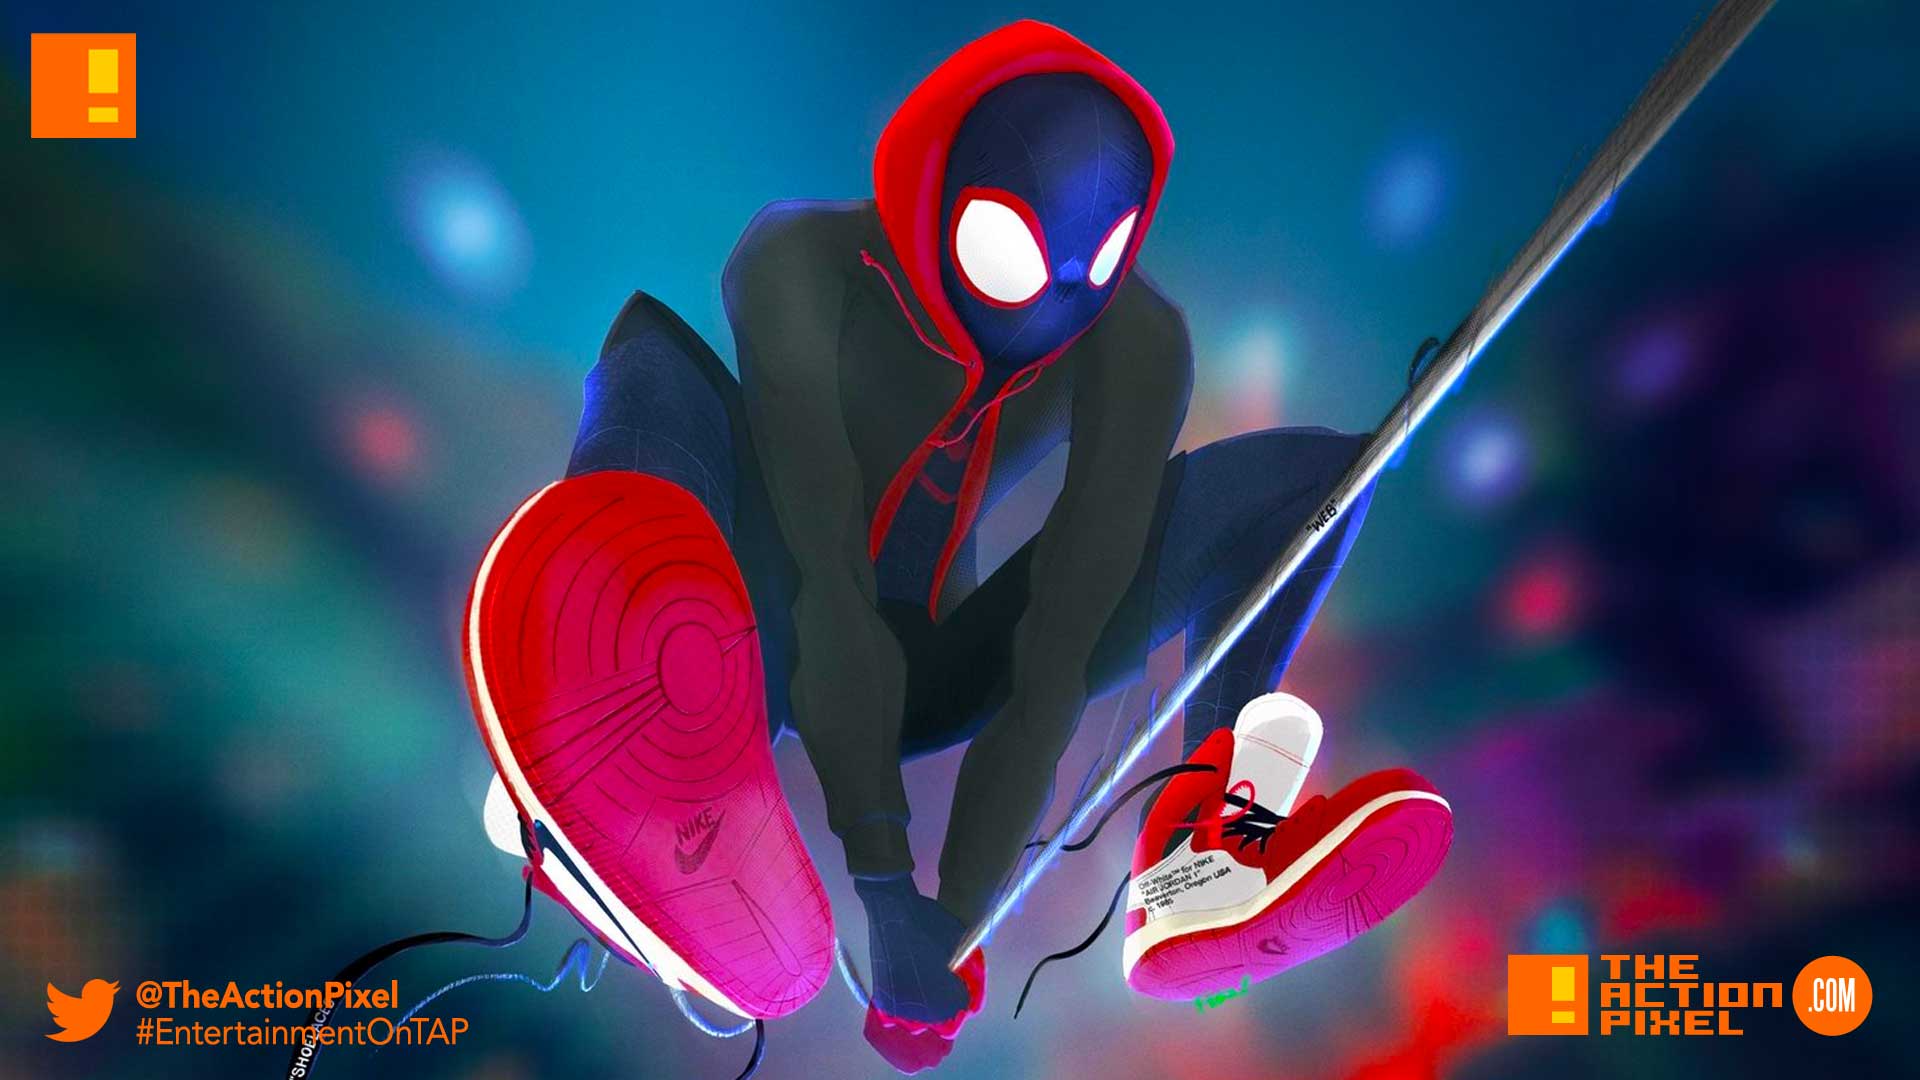 miles morales, spiderman, spider man, spider-man, sony, marvel, marvel comics, animated feature, animation, the action pixel, entertainment on tap,sony animation, marvel,into the spiderverse, spider-man: into the spider-verse,gwen stacey, clip, another dimension, sony animation, spider-women, spin-off, sequel